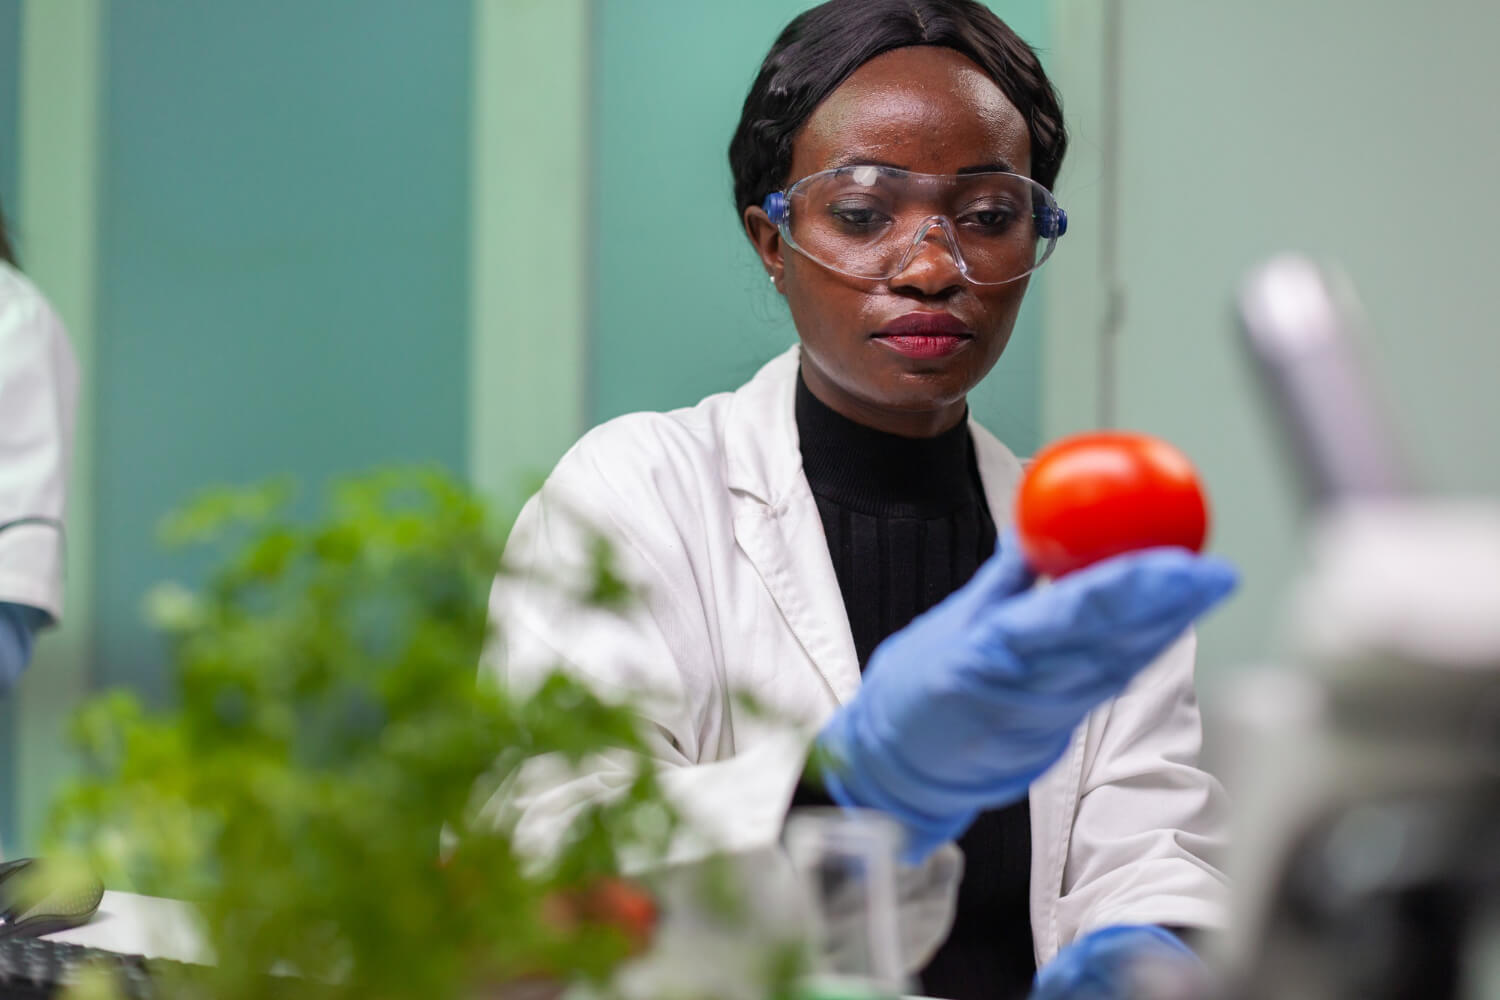 Agricultural Science student in lab testing tomatoes